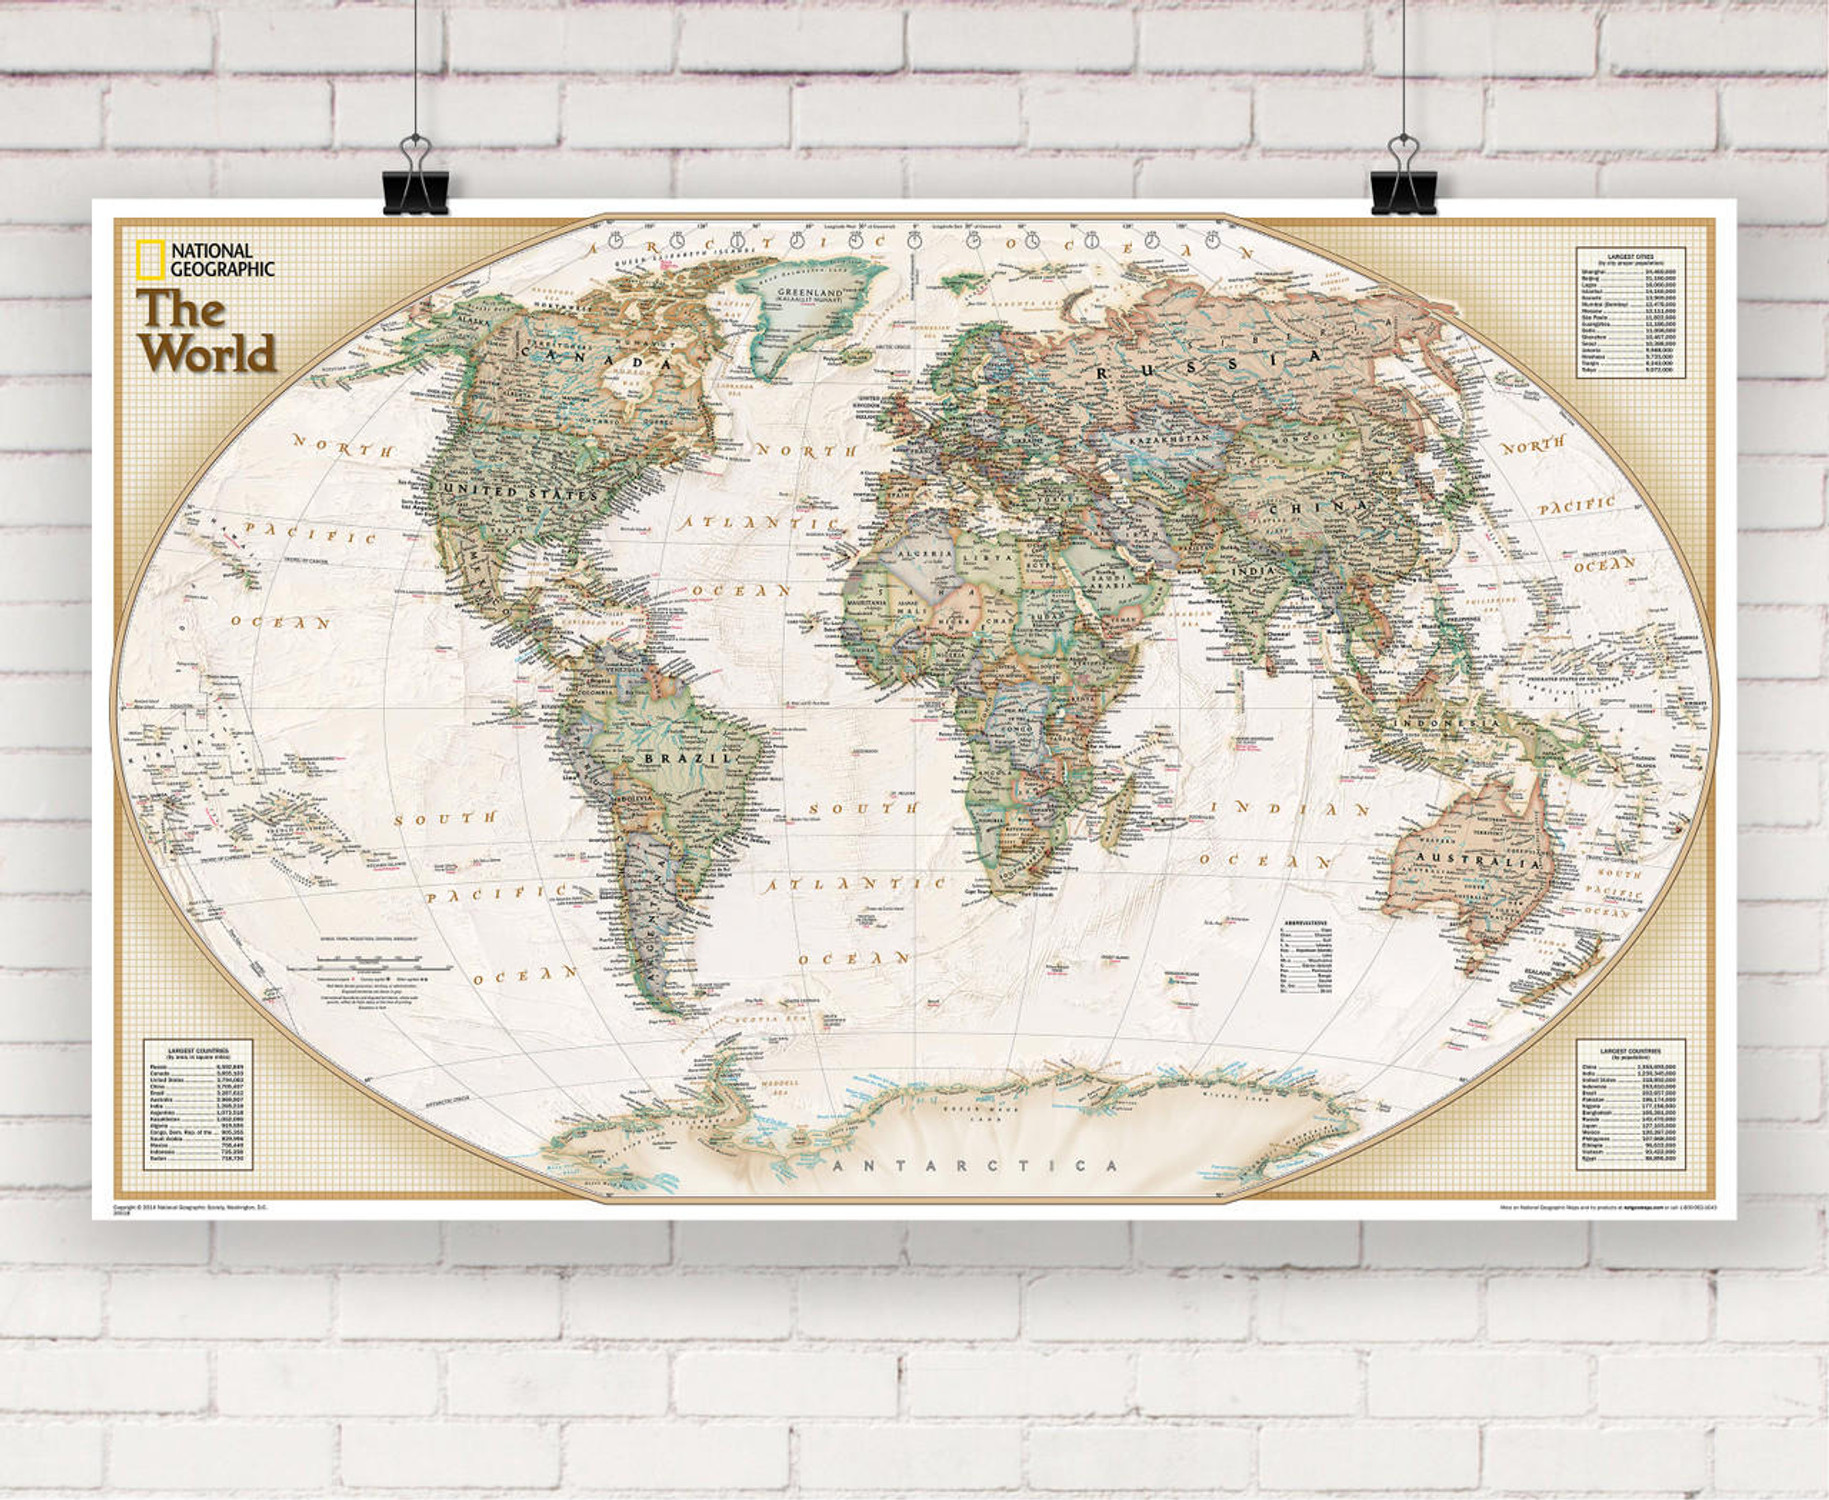 National Geographic World Explorer Executive Wall Map, image 1, World Maps Online